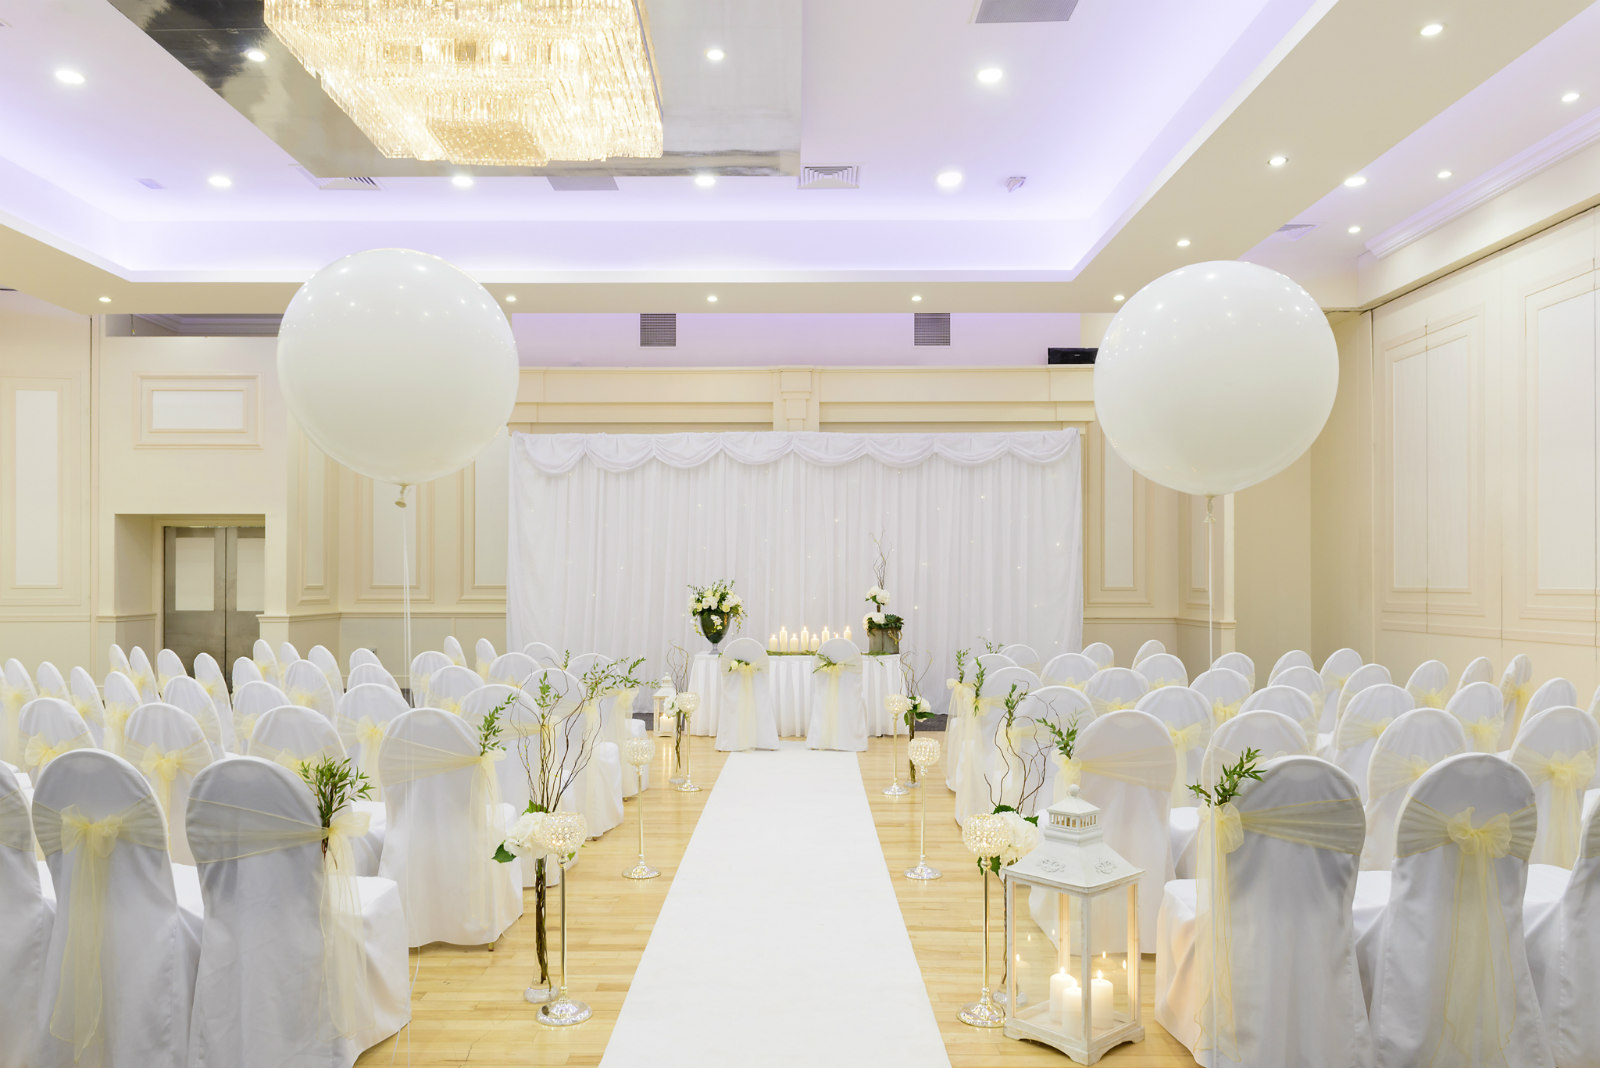 Discover magical moments for your wedding at the Hillgrove Hotel & Spa Wedding Showcase